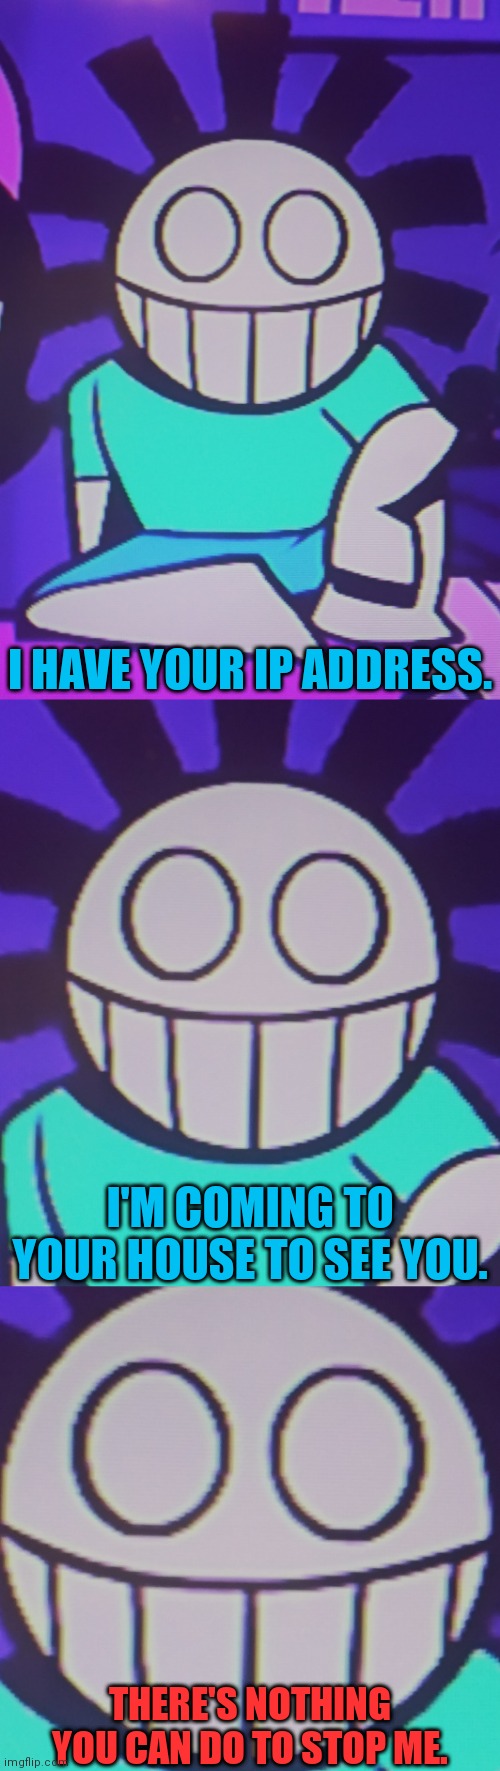 I HAVE YOUR IP ADDRESS. I'M COMING TO YOUR HOUSE TO SEE YOU. THERE'S NOTHING YOU CAN DO TO STOP ME. | image tagged in friday night funkin,shitpost | made w/ Imgflip meme maker